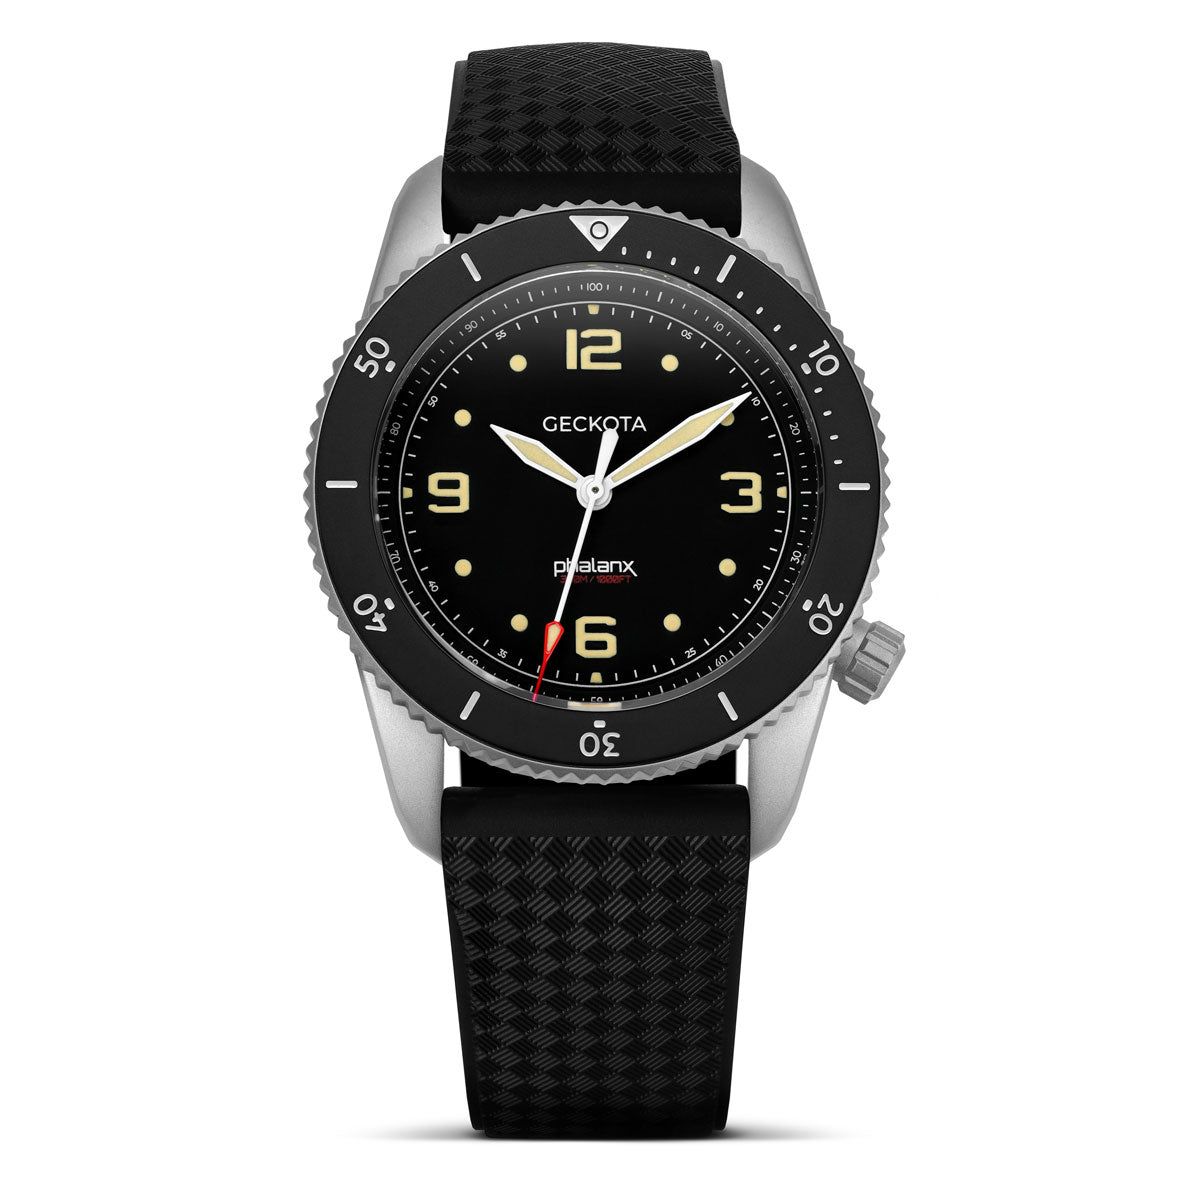 Phalanx S-01 Special Operations Watch - Intelligence Tactical Set